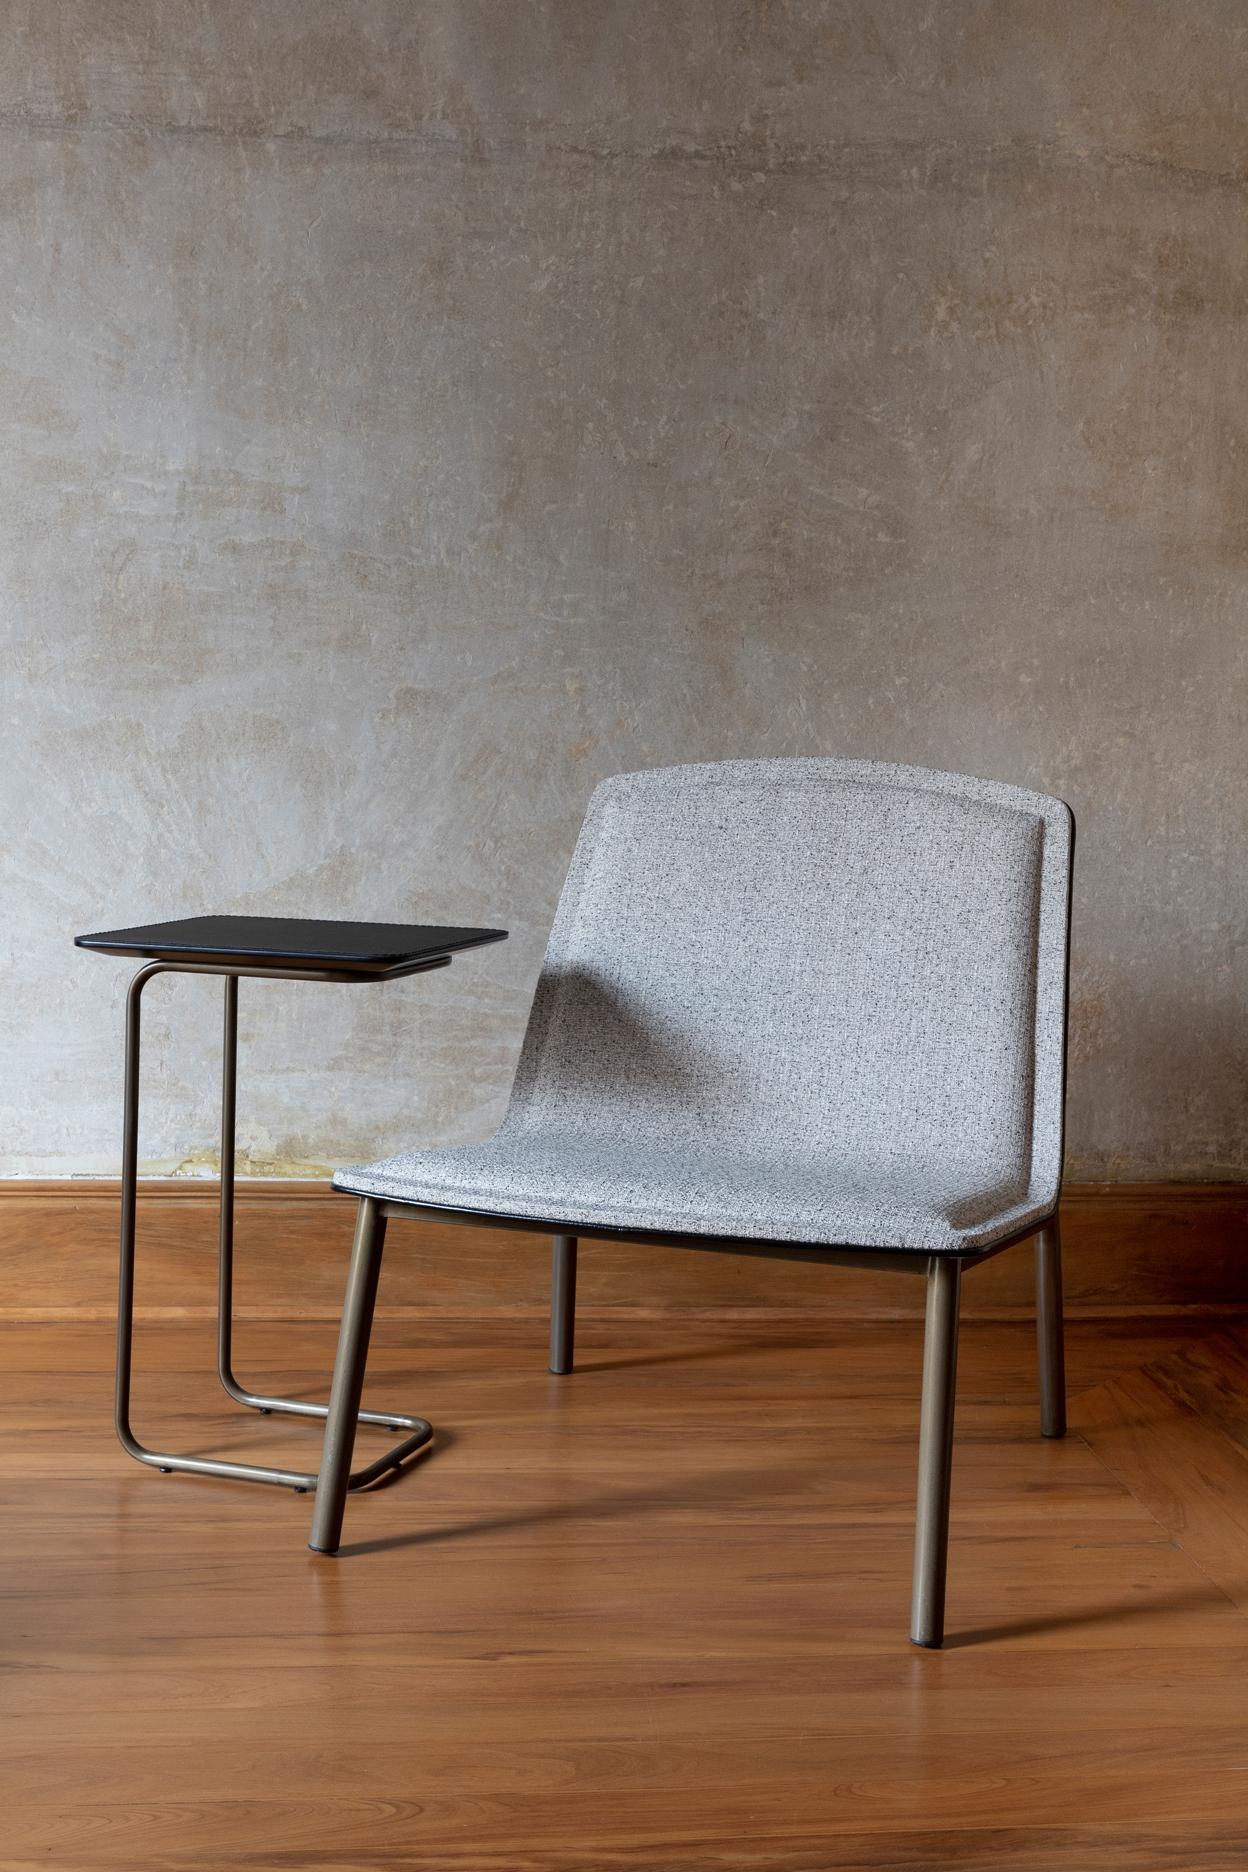 Moi Lounge Chair by Doimo Brasil
Dimensions: W 69 x D 77 x H 80 cm 
Materials: Aged Steel, Fabric.


With the intention of providing good taste and personality, Doimo deciphers trends and follows the evolution of man and his space. To this end, it